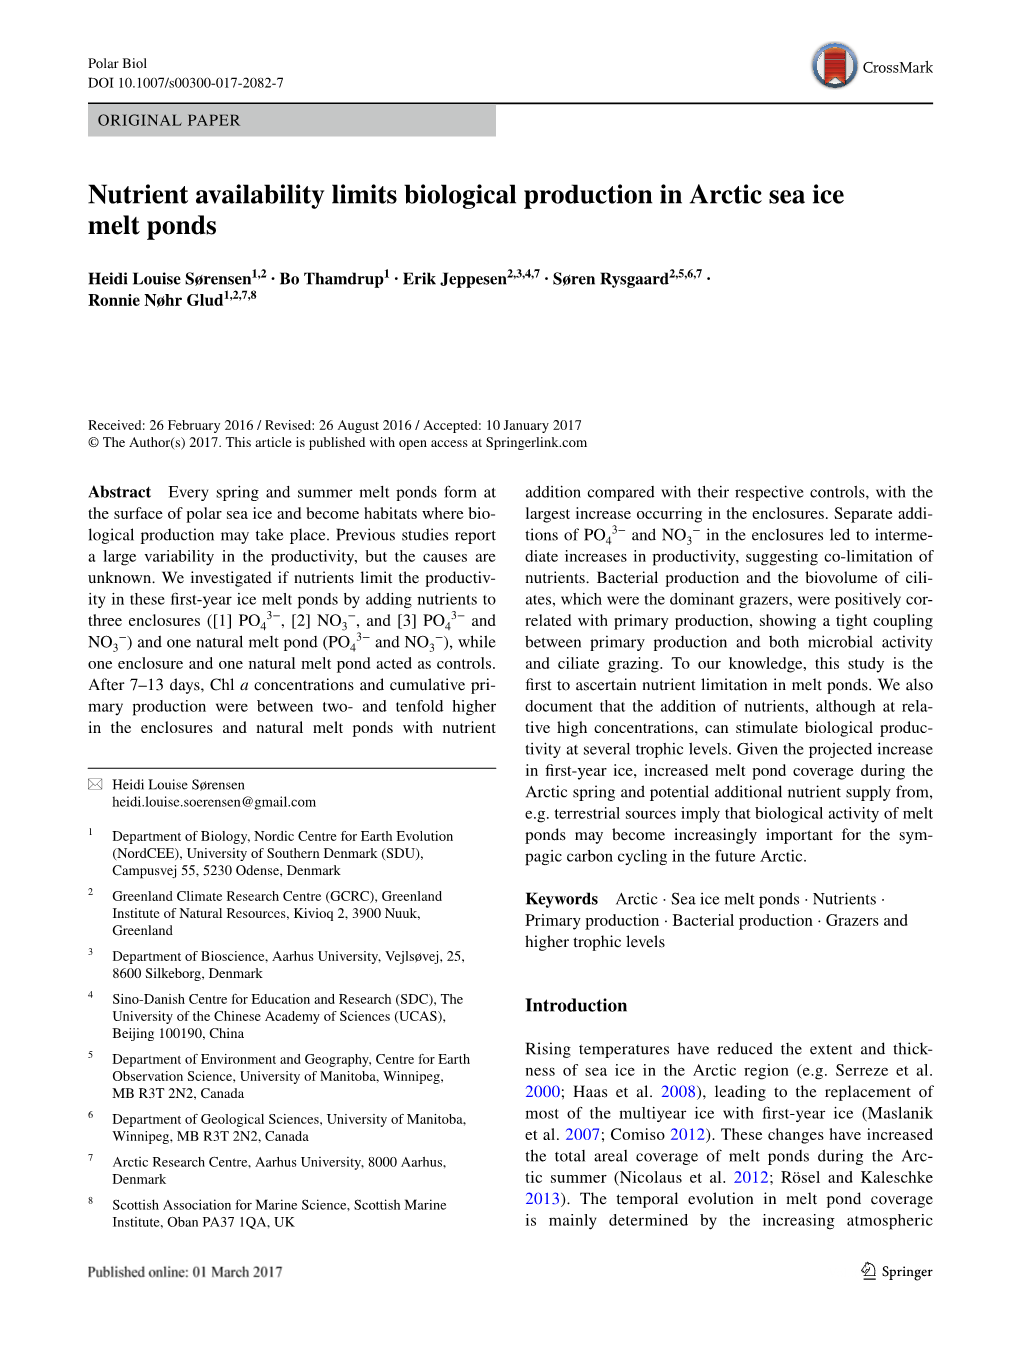 Nutrient Availability Limits Biological Production in Arctic Sea Ice Melt Ponds